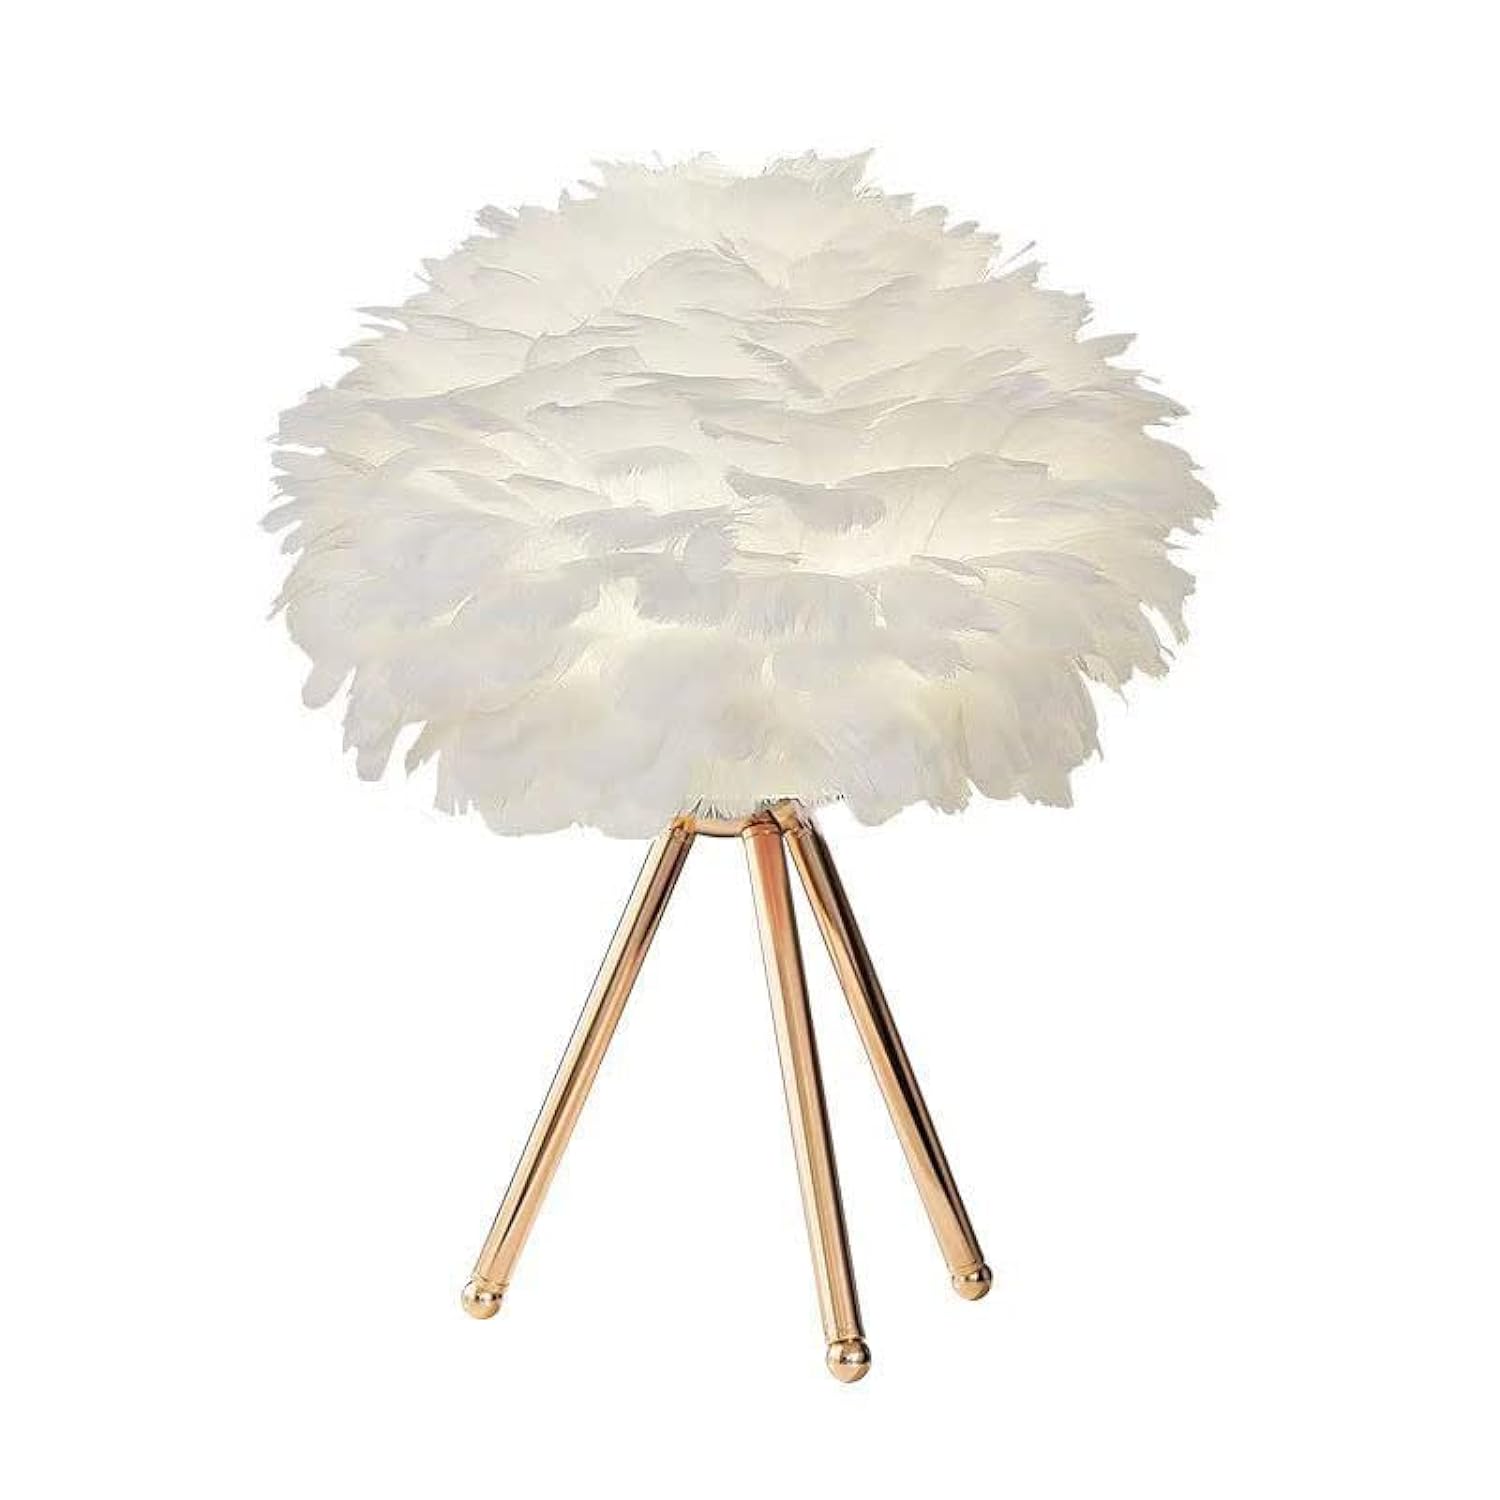 thinkstar Feather Table Lamp, Night Stand Table Lamp, Bed Room Table Lamp, Dining Room Table Lamp, Kids Room Table Lamp, Girl Room…